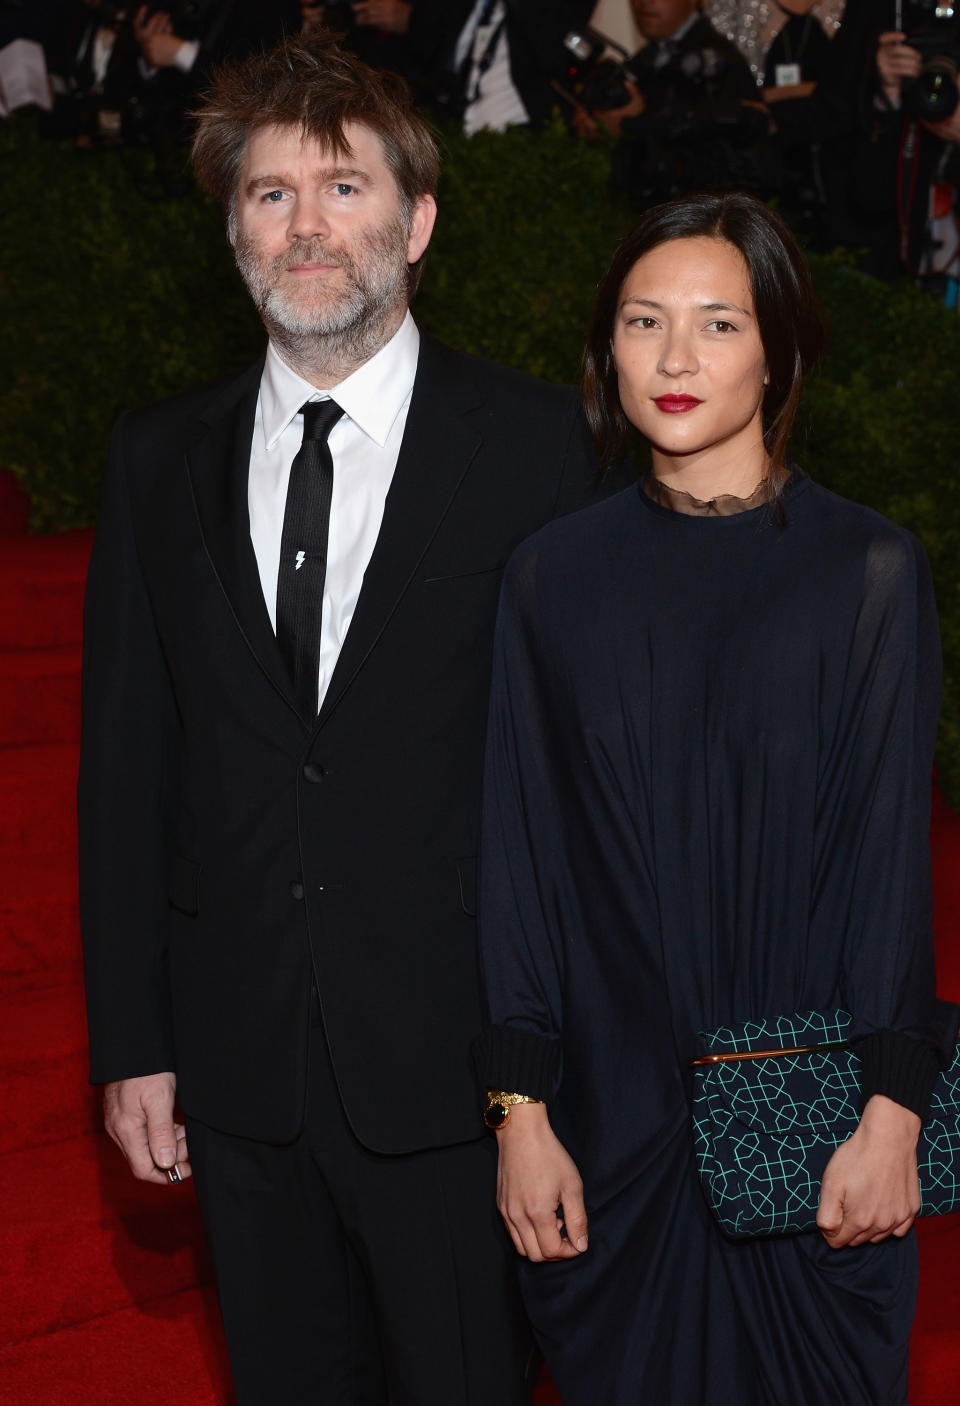 NEW YORK, NY - MAY 07: James Murphy and Mandy Coon attend the "Schiaparelli And Prada: Impossible Conversations" Costume Institute Gala at the Metropolitan Museum of Art on May 7, 2012 in New York City. (Photo by Dimitrios Kambouris/Getty Images)